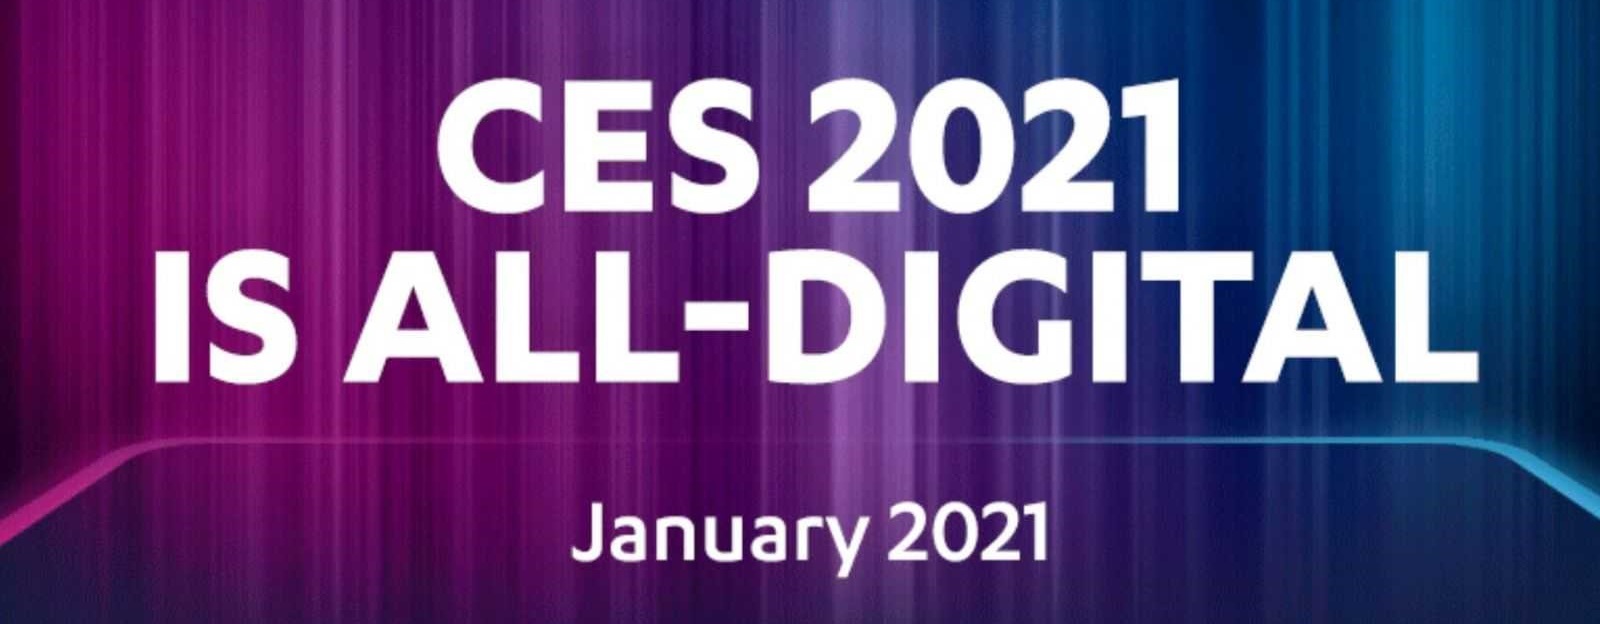 CES 2021 IS ALL-DIGITAL